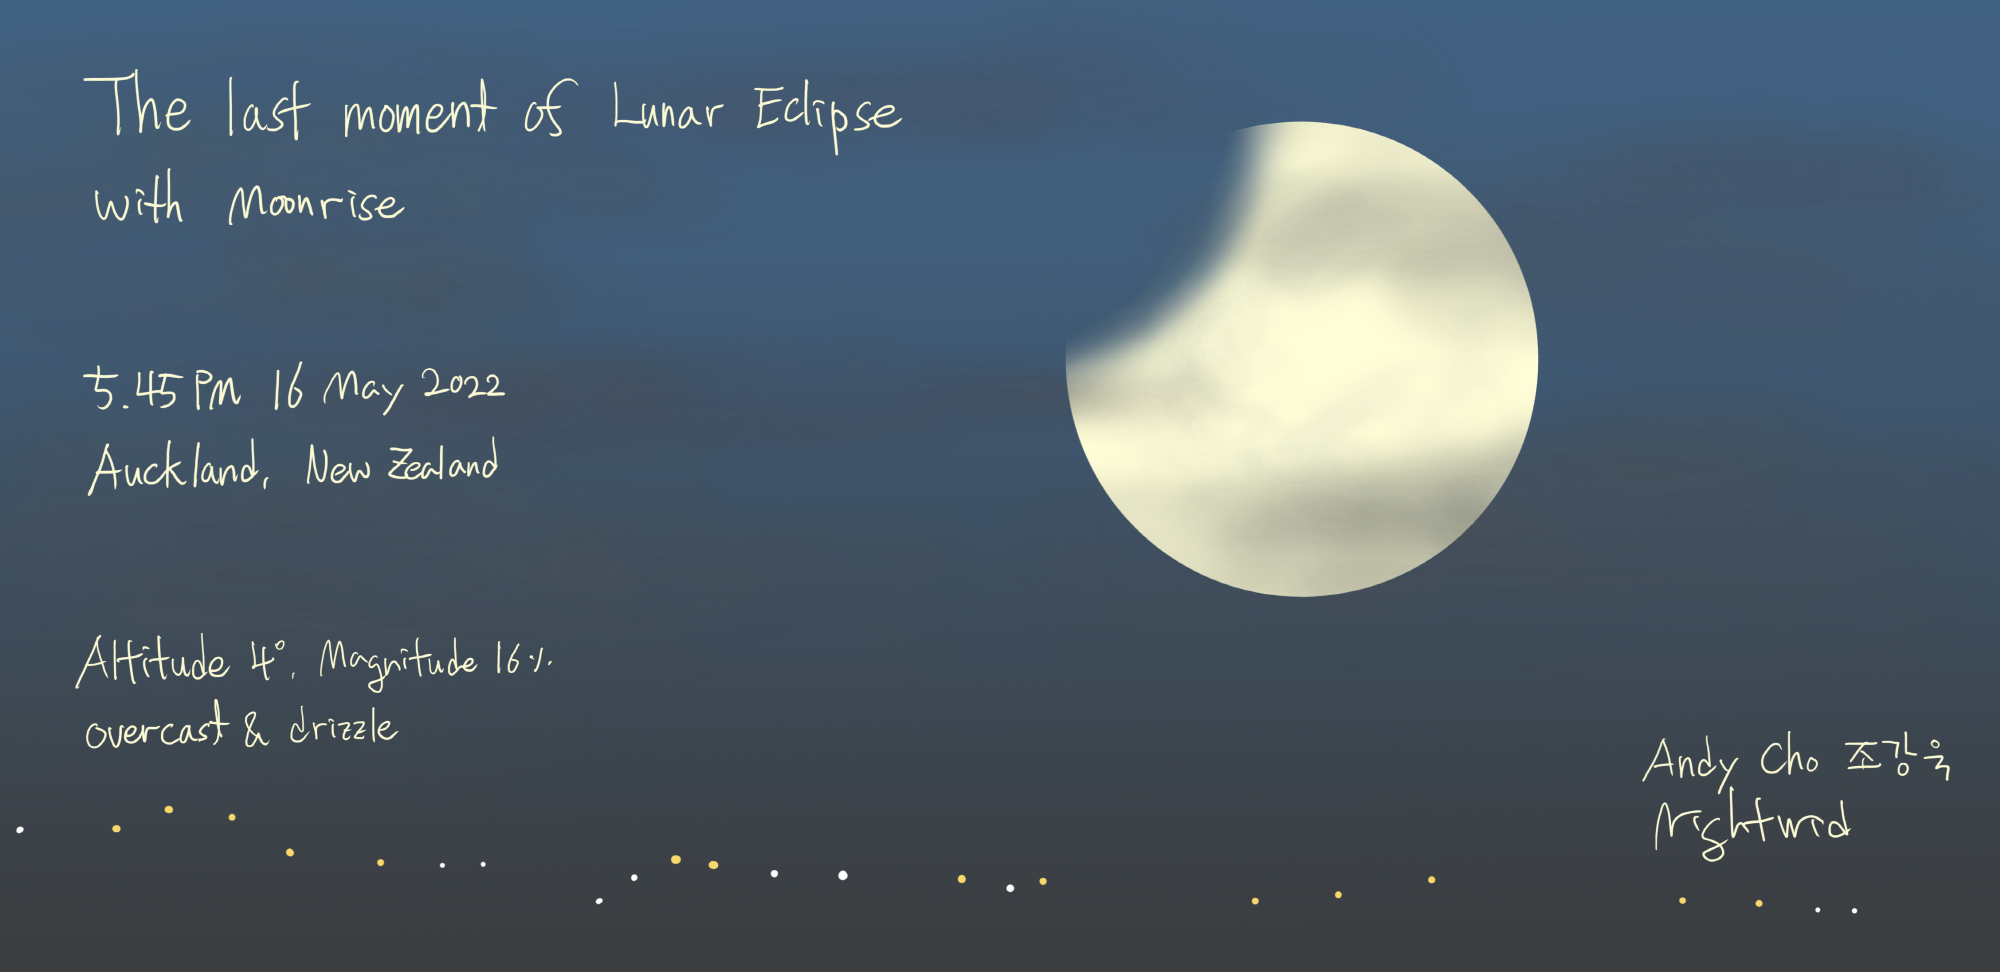 [Resized]Lunar eclipse with Moonrise.jpg